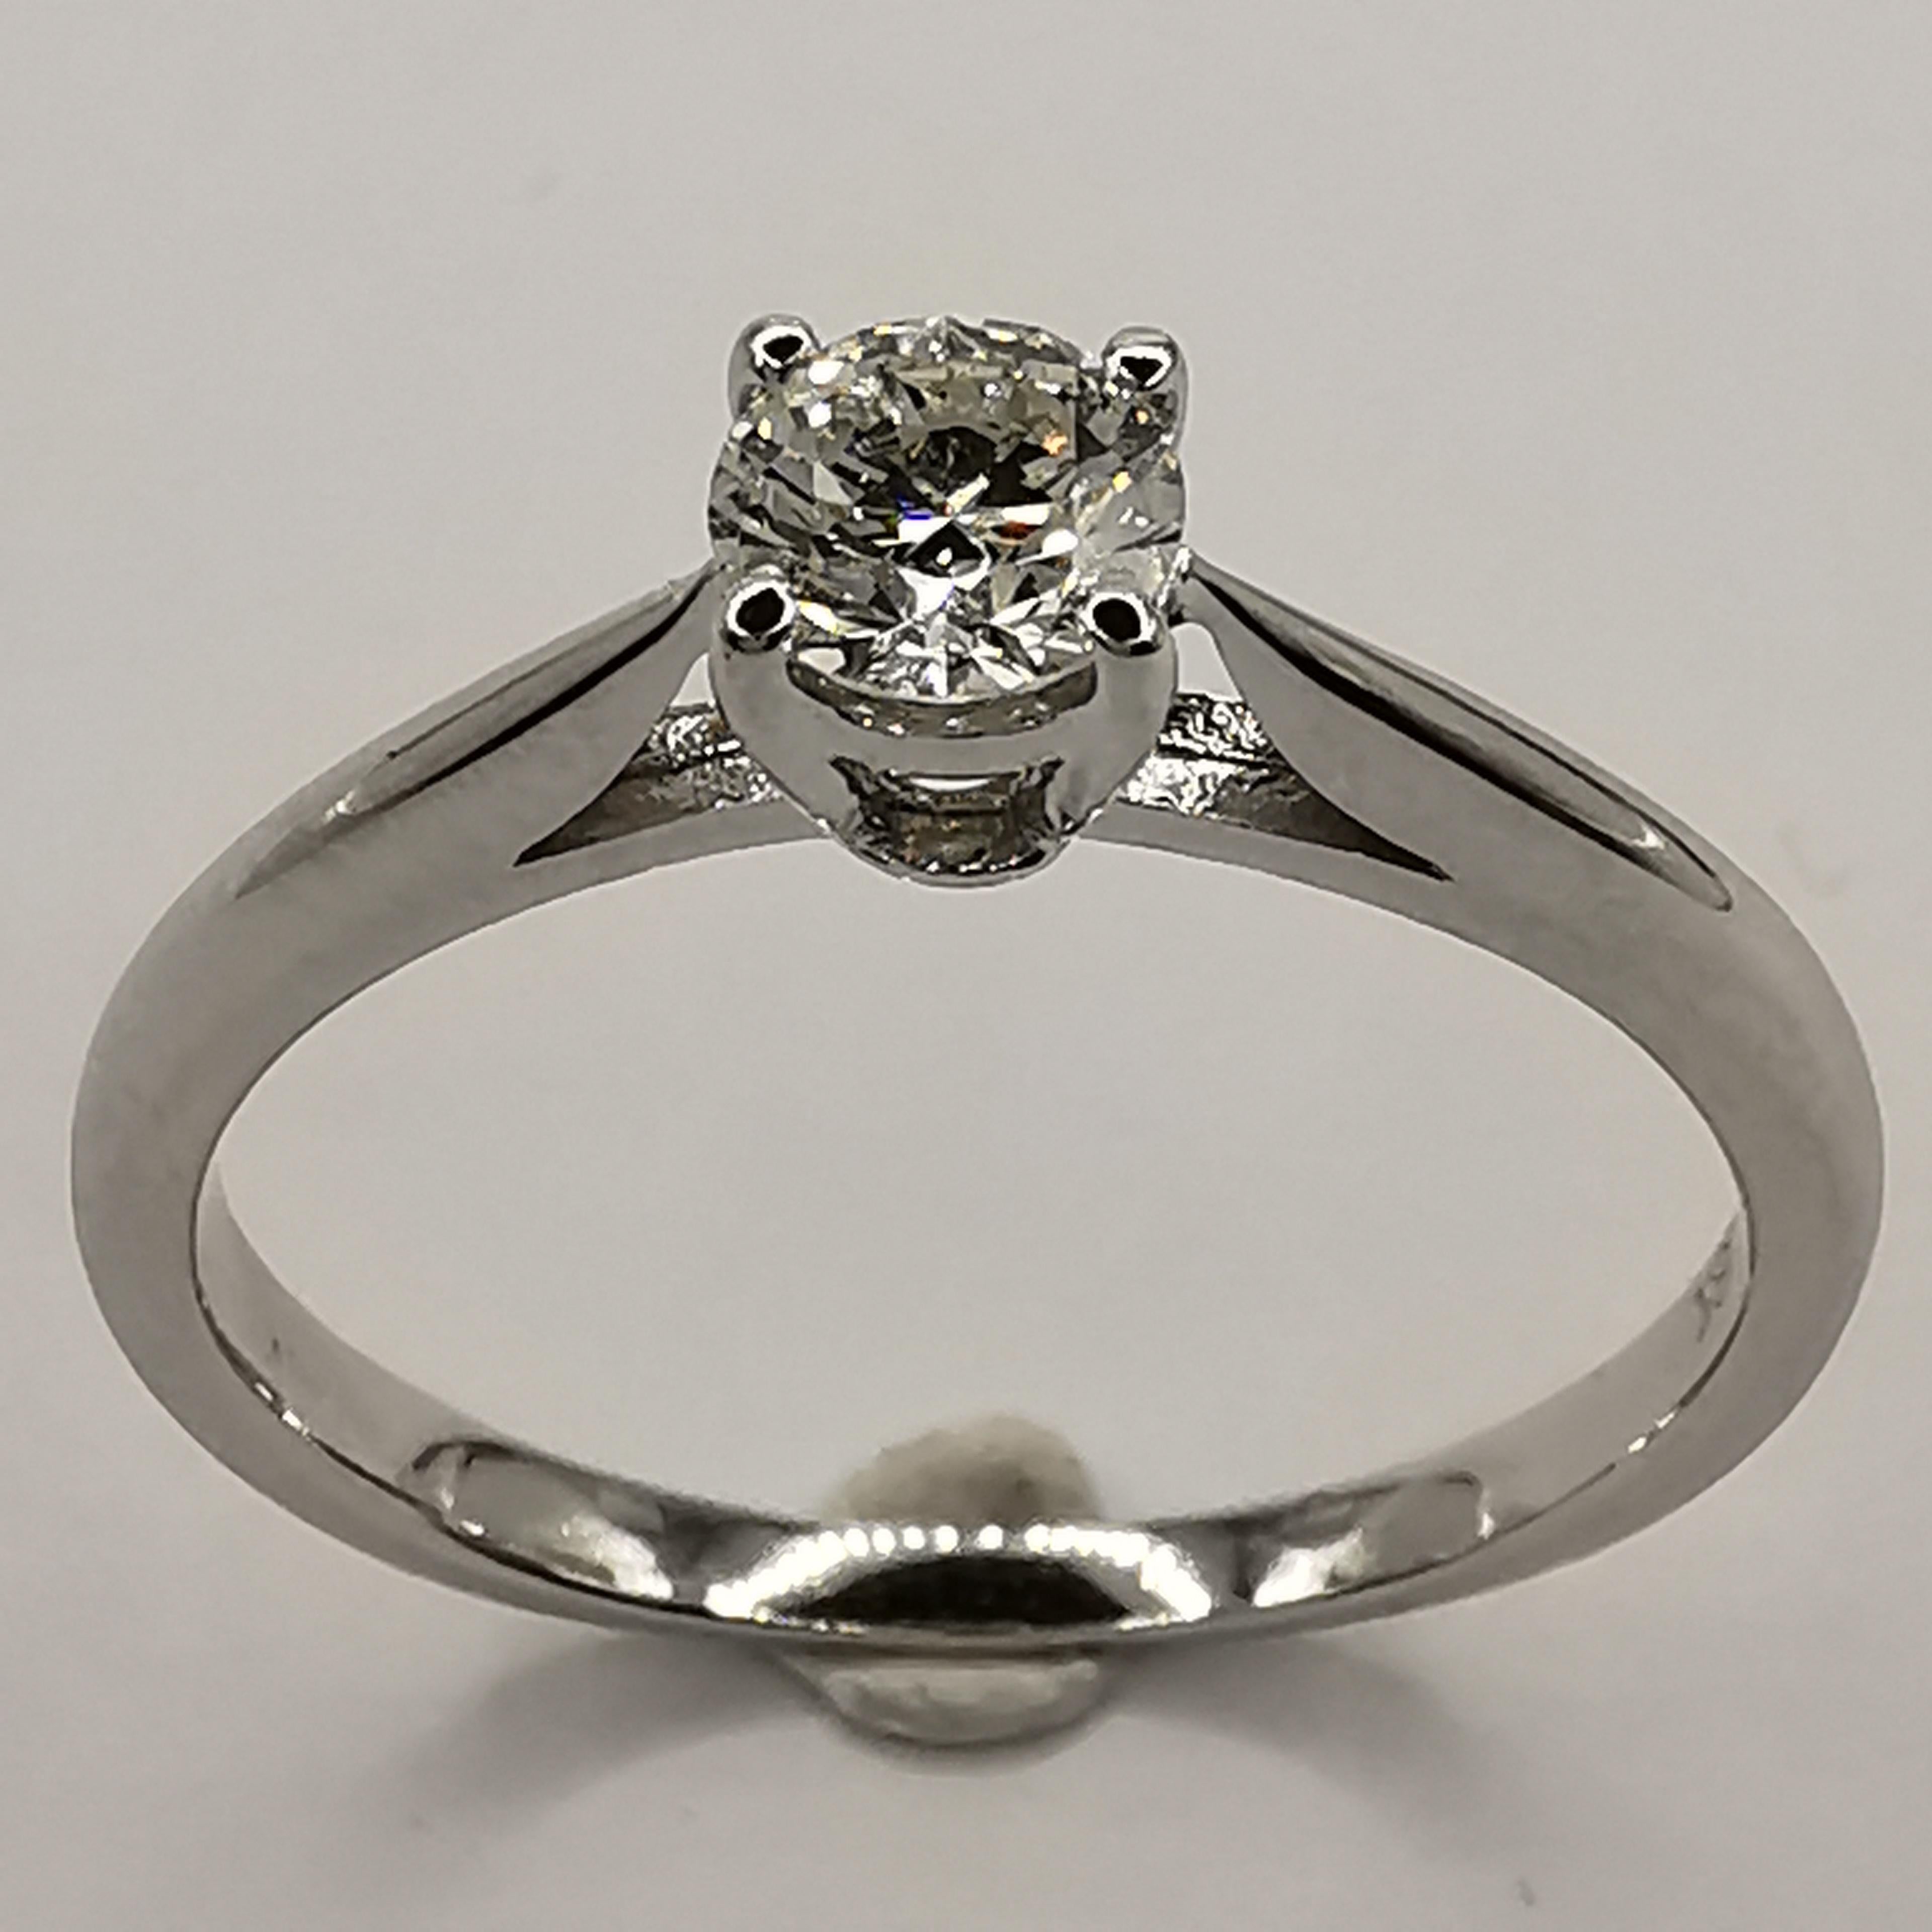 This elegant and modern solitaire diamond engagement ring is the perfect choice for anyone looking for a timeless and stylish piece. The ring is made of high quality 18k white gold and features a contemporary four-prong setting with a single